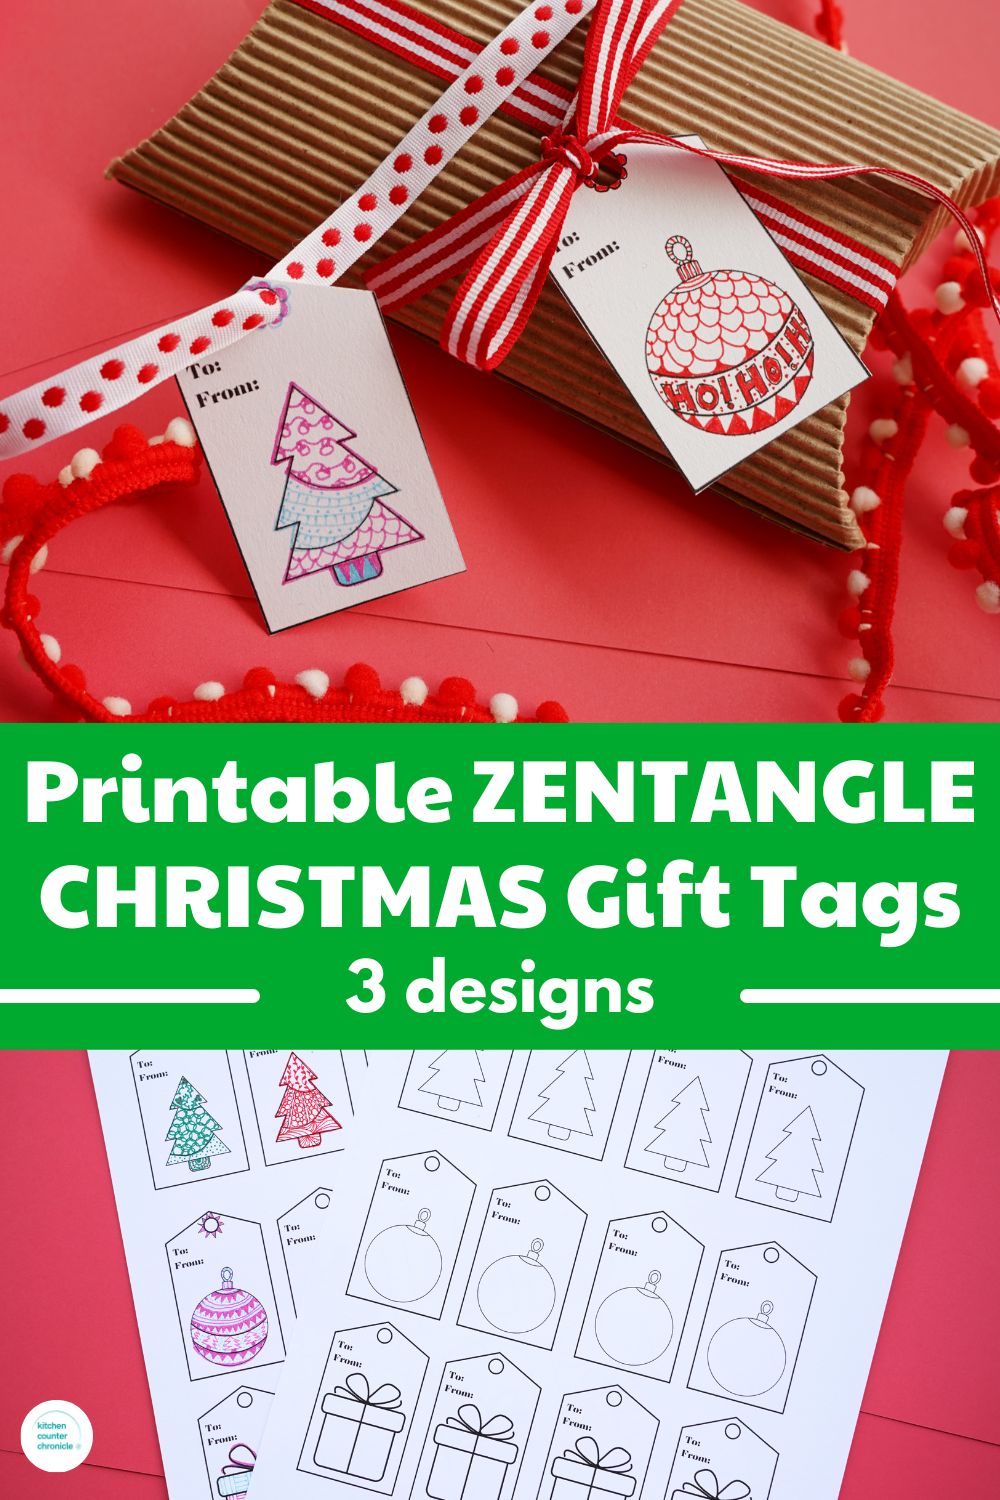 title "printable zentangle Christmas gift tags" with image of sheet of printable gift tags and tags on wrapped gifts with red ribbon